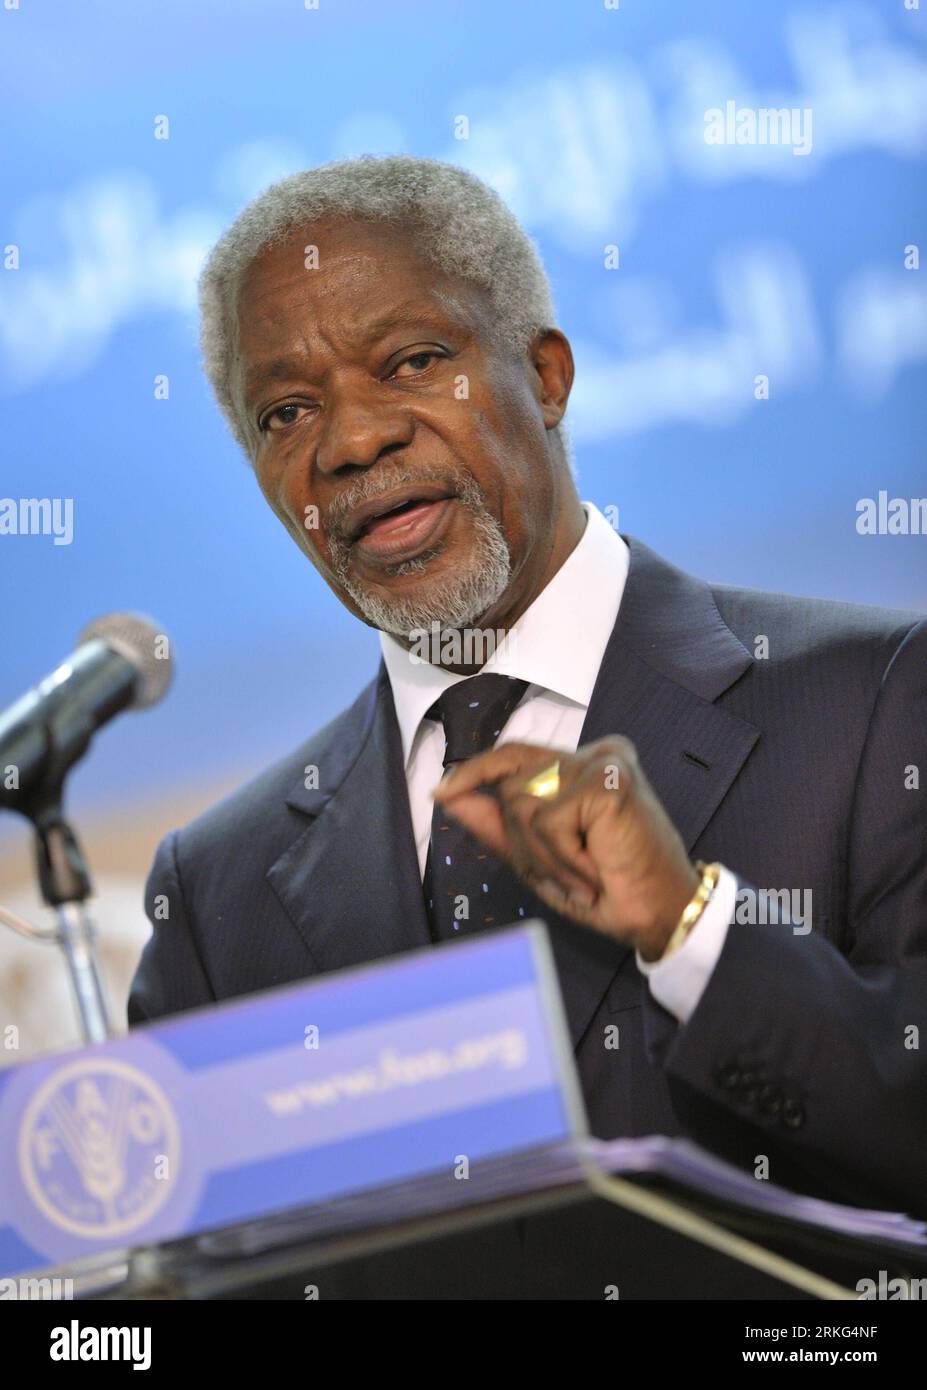 Bildnummer: 55544983  Datum: 25.06.2011  Copyright: imago/Xinhua (110625) -- ROME, June 25, 2011 (Xinhua) -- Kofi Annan, the seventh Secretary-General of the United Nations and chairman of the Alliance for a Green Revolution in Africa, addresses the 37th session of the Food and Agriculture Organization (FAO) Conference in Rome, Italy, June 25, 2011. The FAO Conference will elect a new Director-General out of 6 candidates on Sunday. (Xinhua/Wang Qingqin) (zx) ITALY-ROME-FAO-CONFERENCE-OPENING PUBLICATIONxNOTxINxCHN People Politik xdp 2011 hoch premiumd     Bildnummer 55544983 Date 25 06 2011 Co Stock Photo